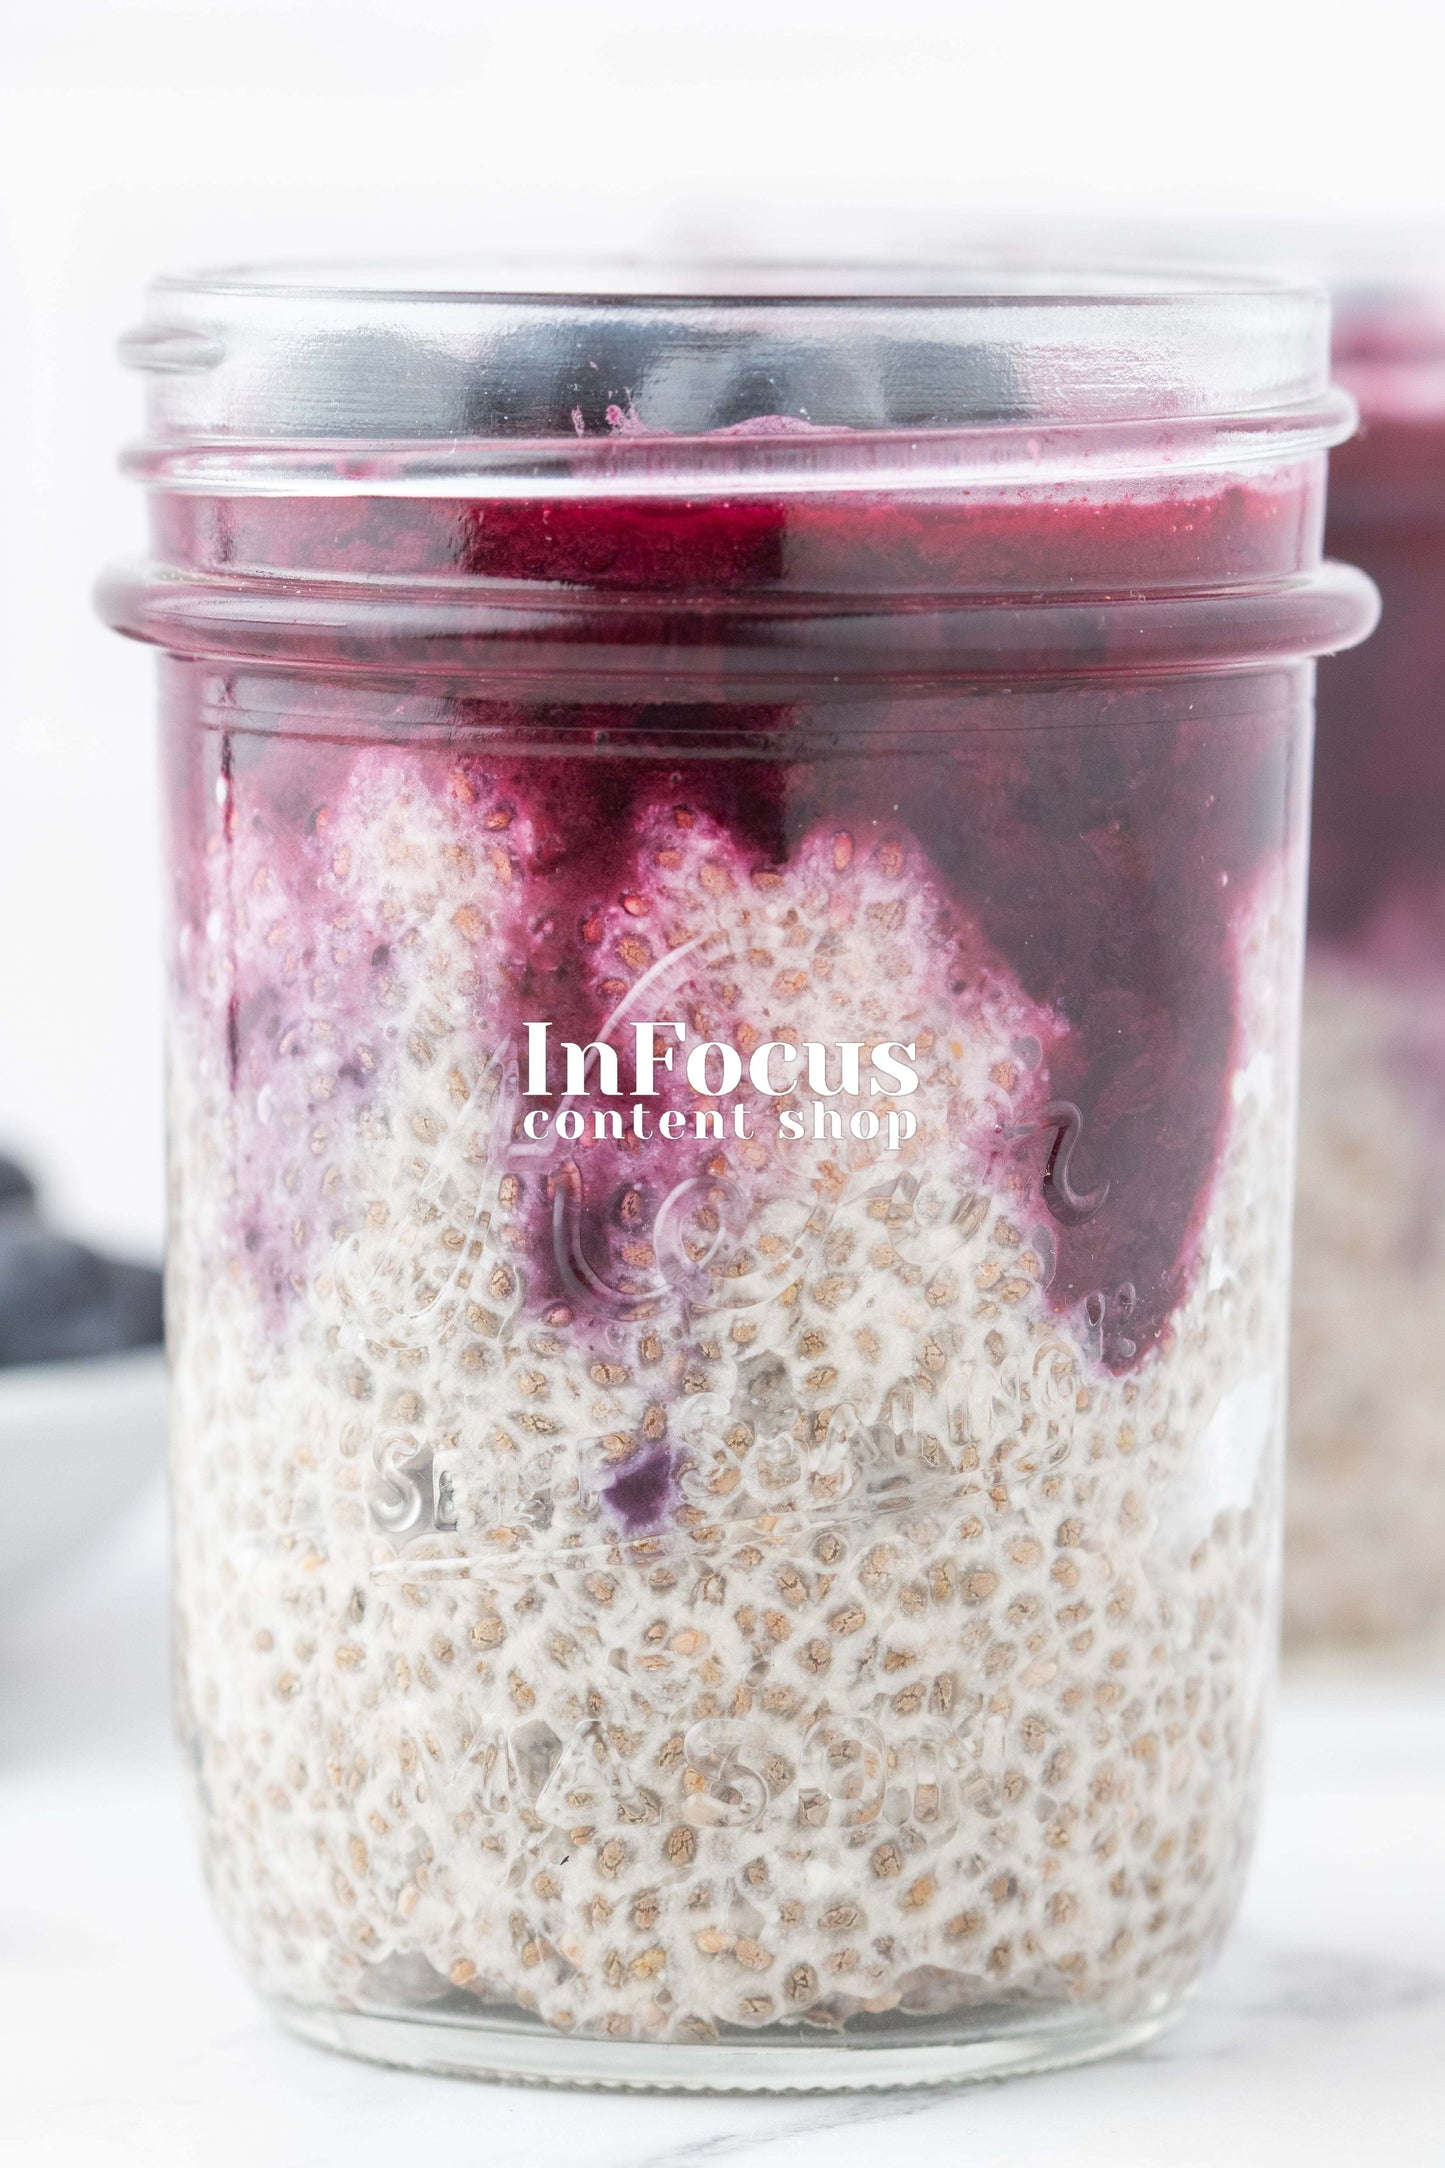 Blueberry Chia Seed Pudding (vegan)- Exclusive